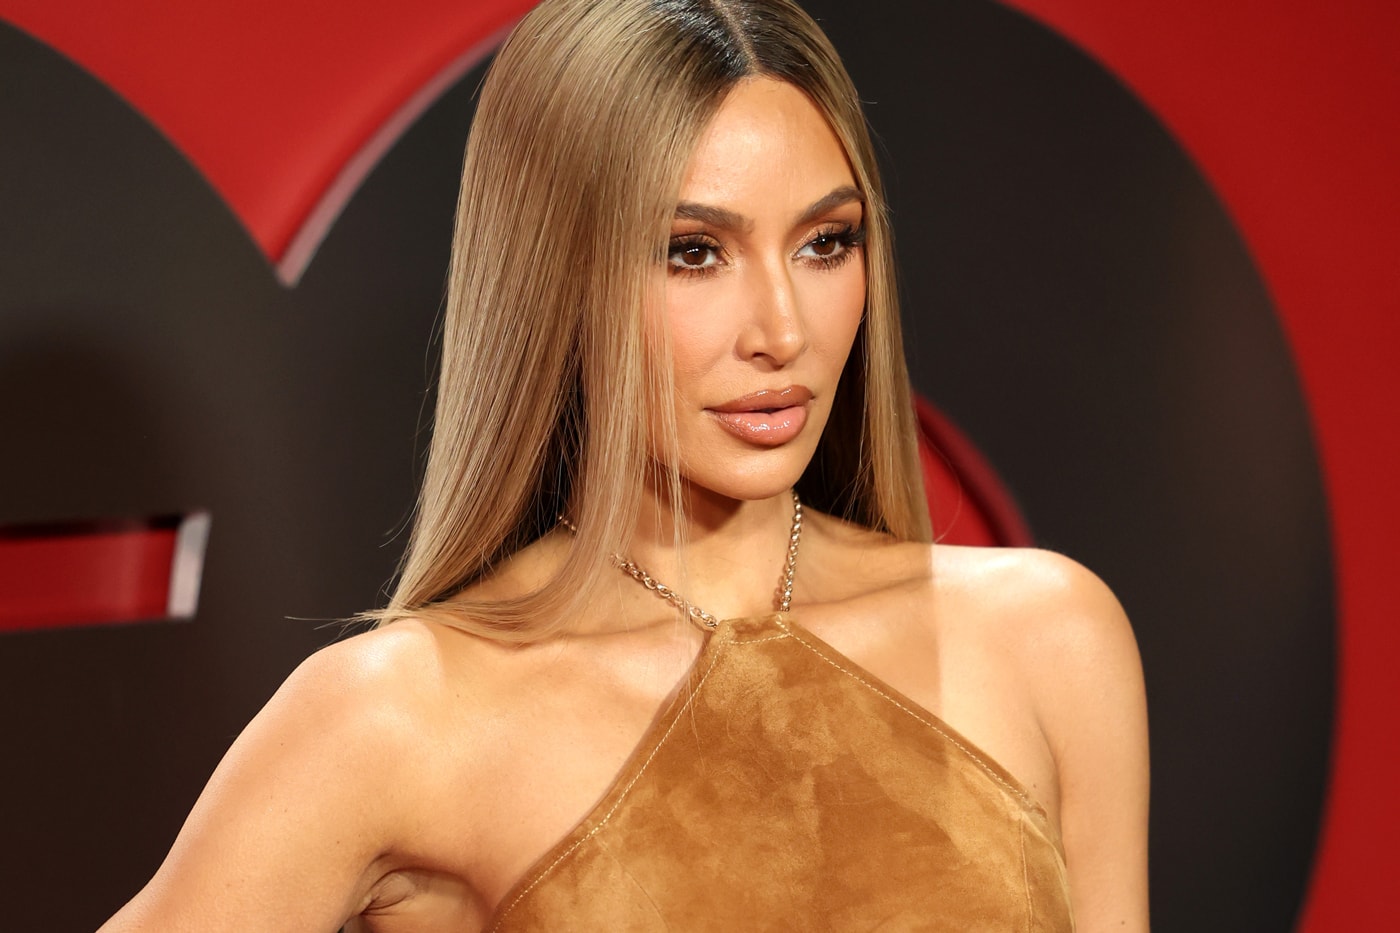 Kim Kardashian The 5th Wheel movie film industry project produce star in pitching hollywood studio bids deadline report details